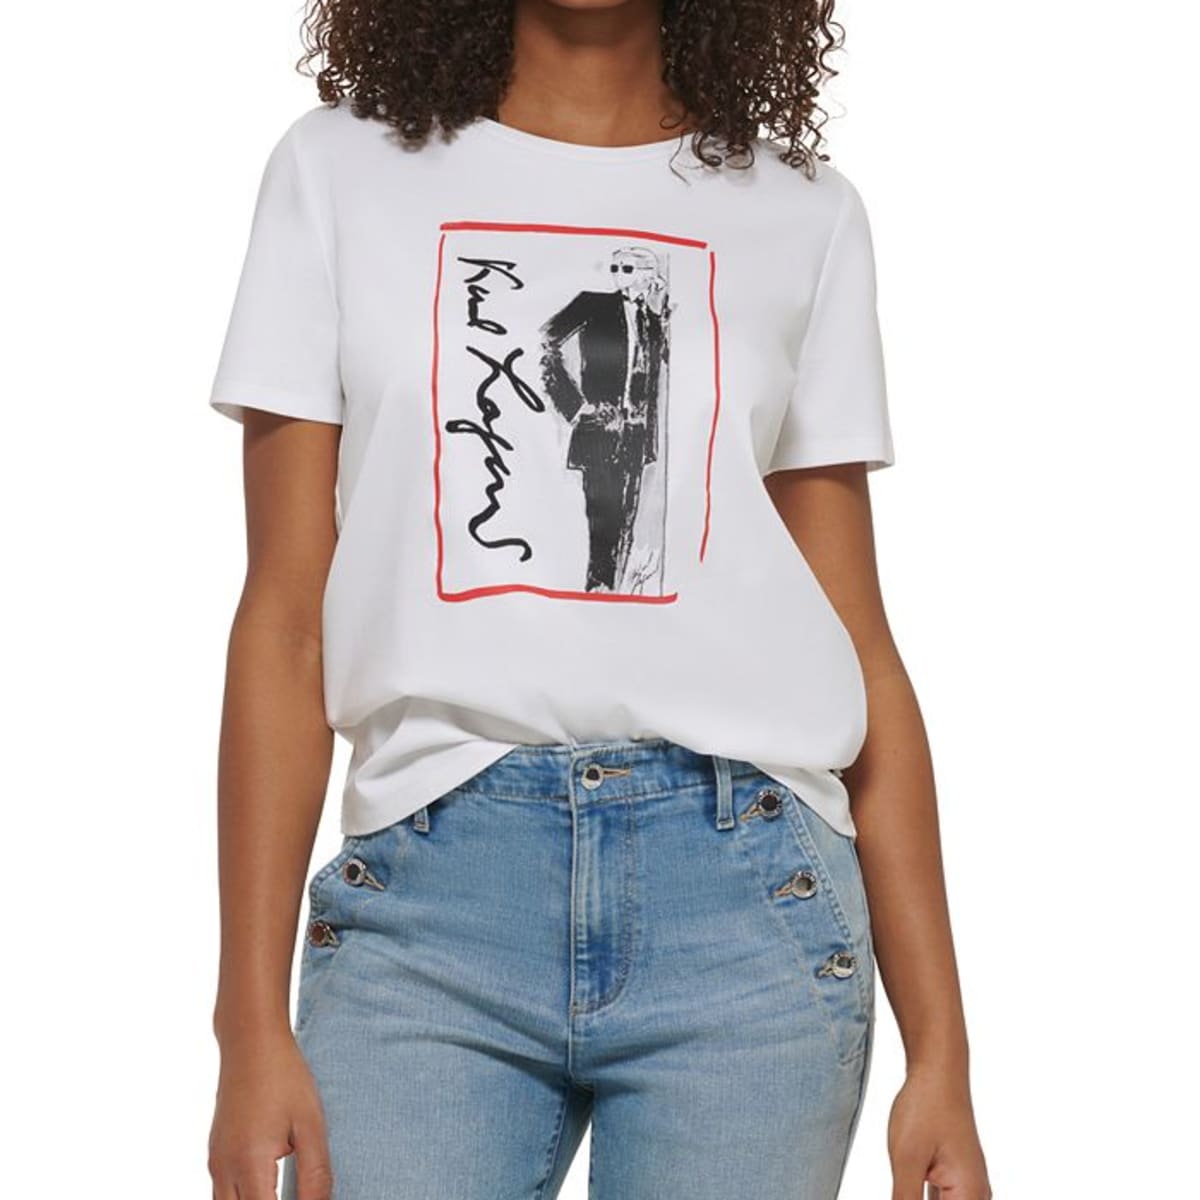 T-Shirt for Anyone Really (Really) Loves Karl Lagerfeld Fashionista